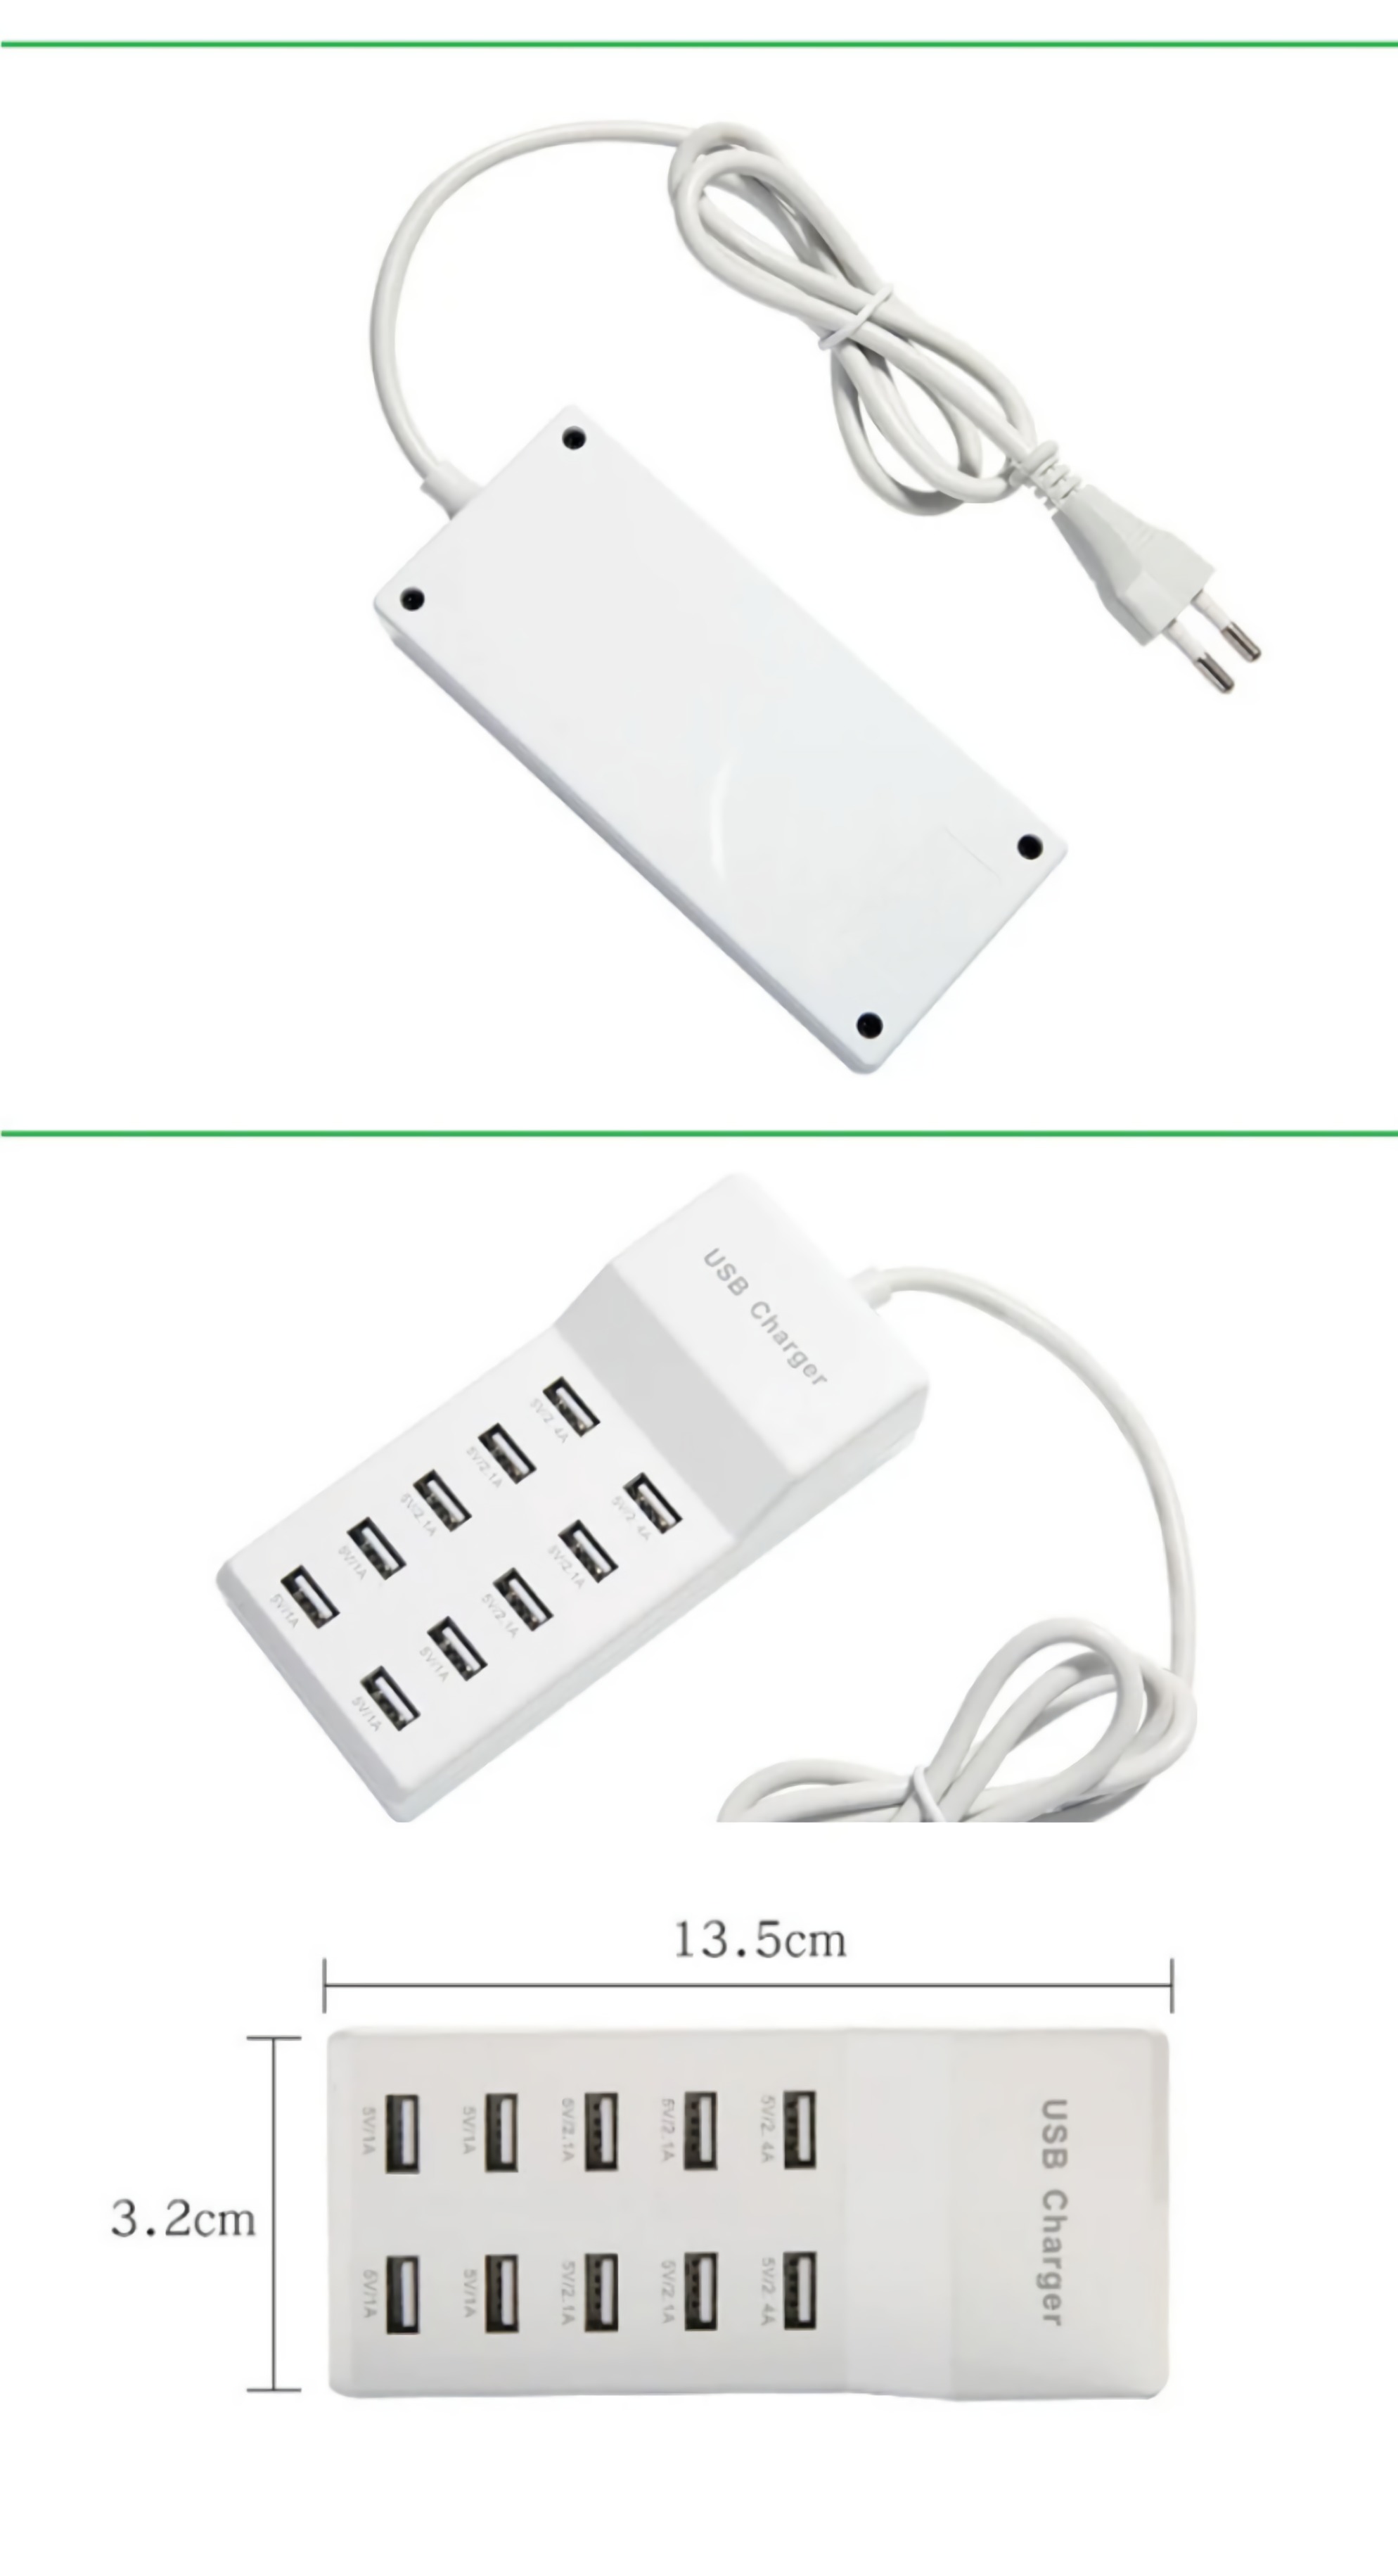 10-Port-USB-Tablet-Charger-EU-Plug-5V-24A-Wall-Charger-Hubs-for-Samsung-Huawei-Tablets-Phone-Pad-Fas-1658734-4